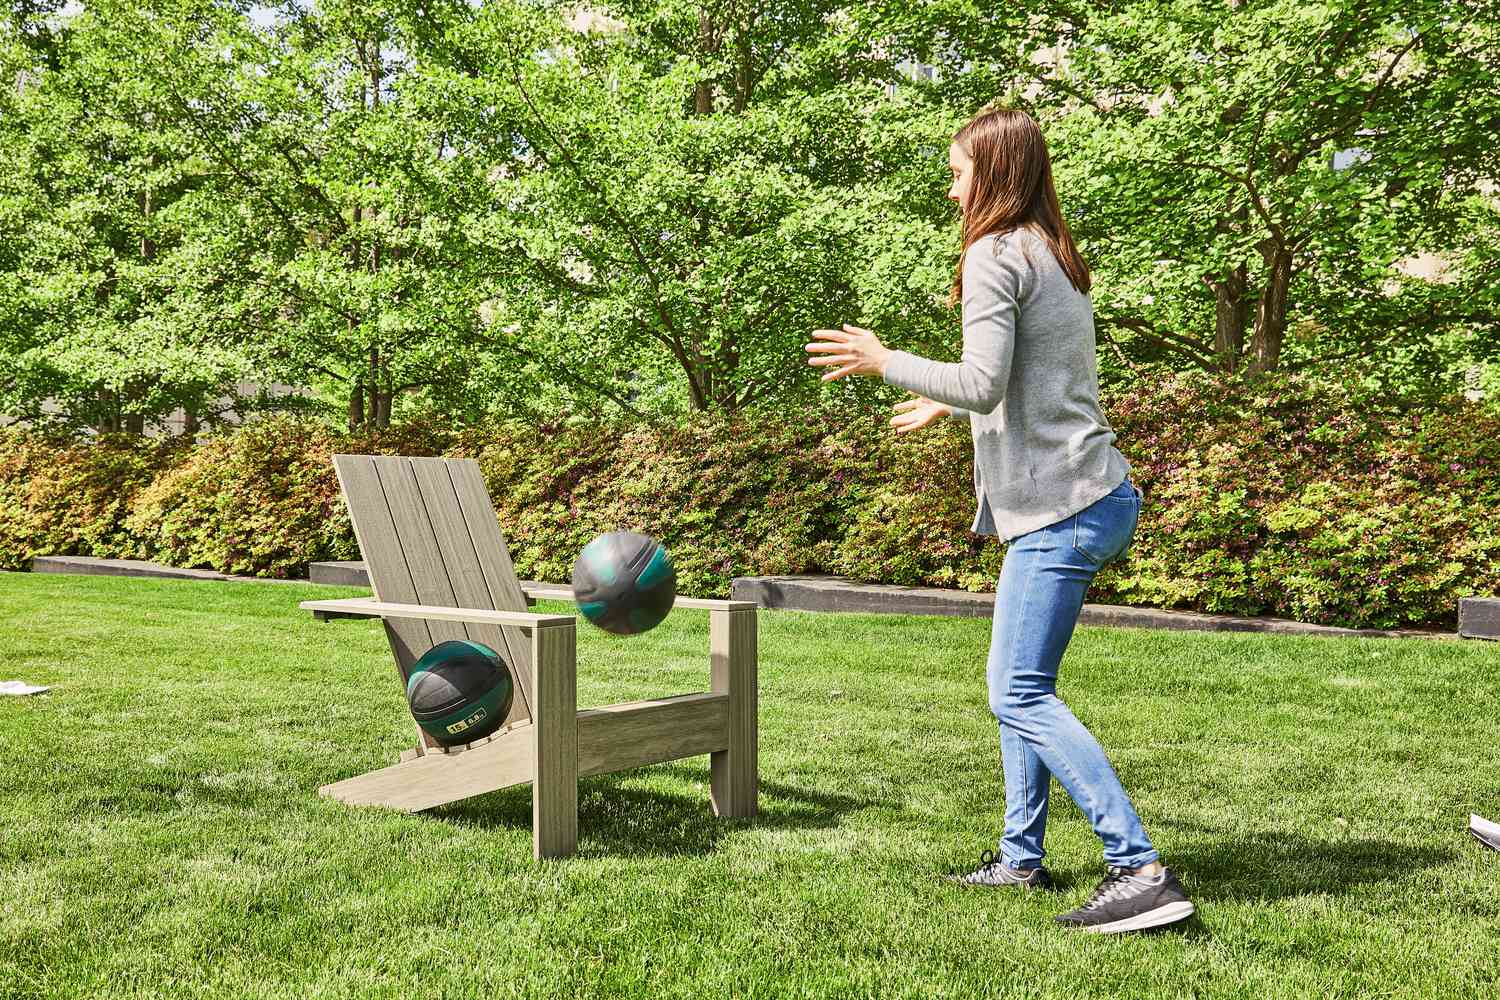 Person testing Adirondack chair durability by throwing balls at it